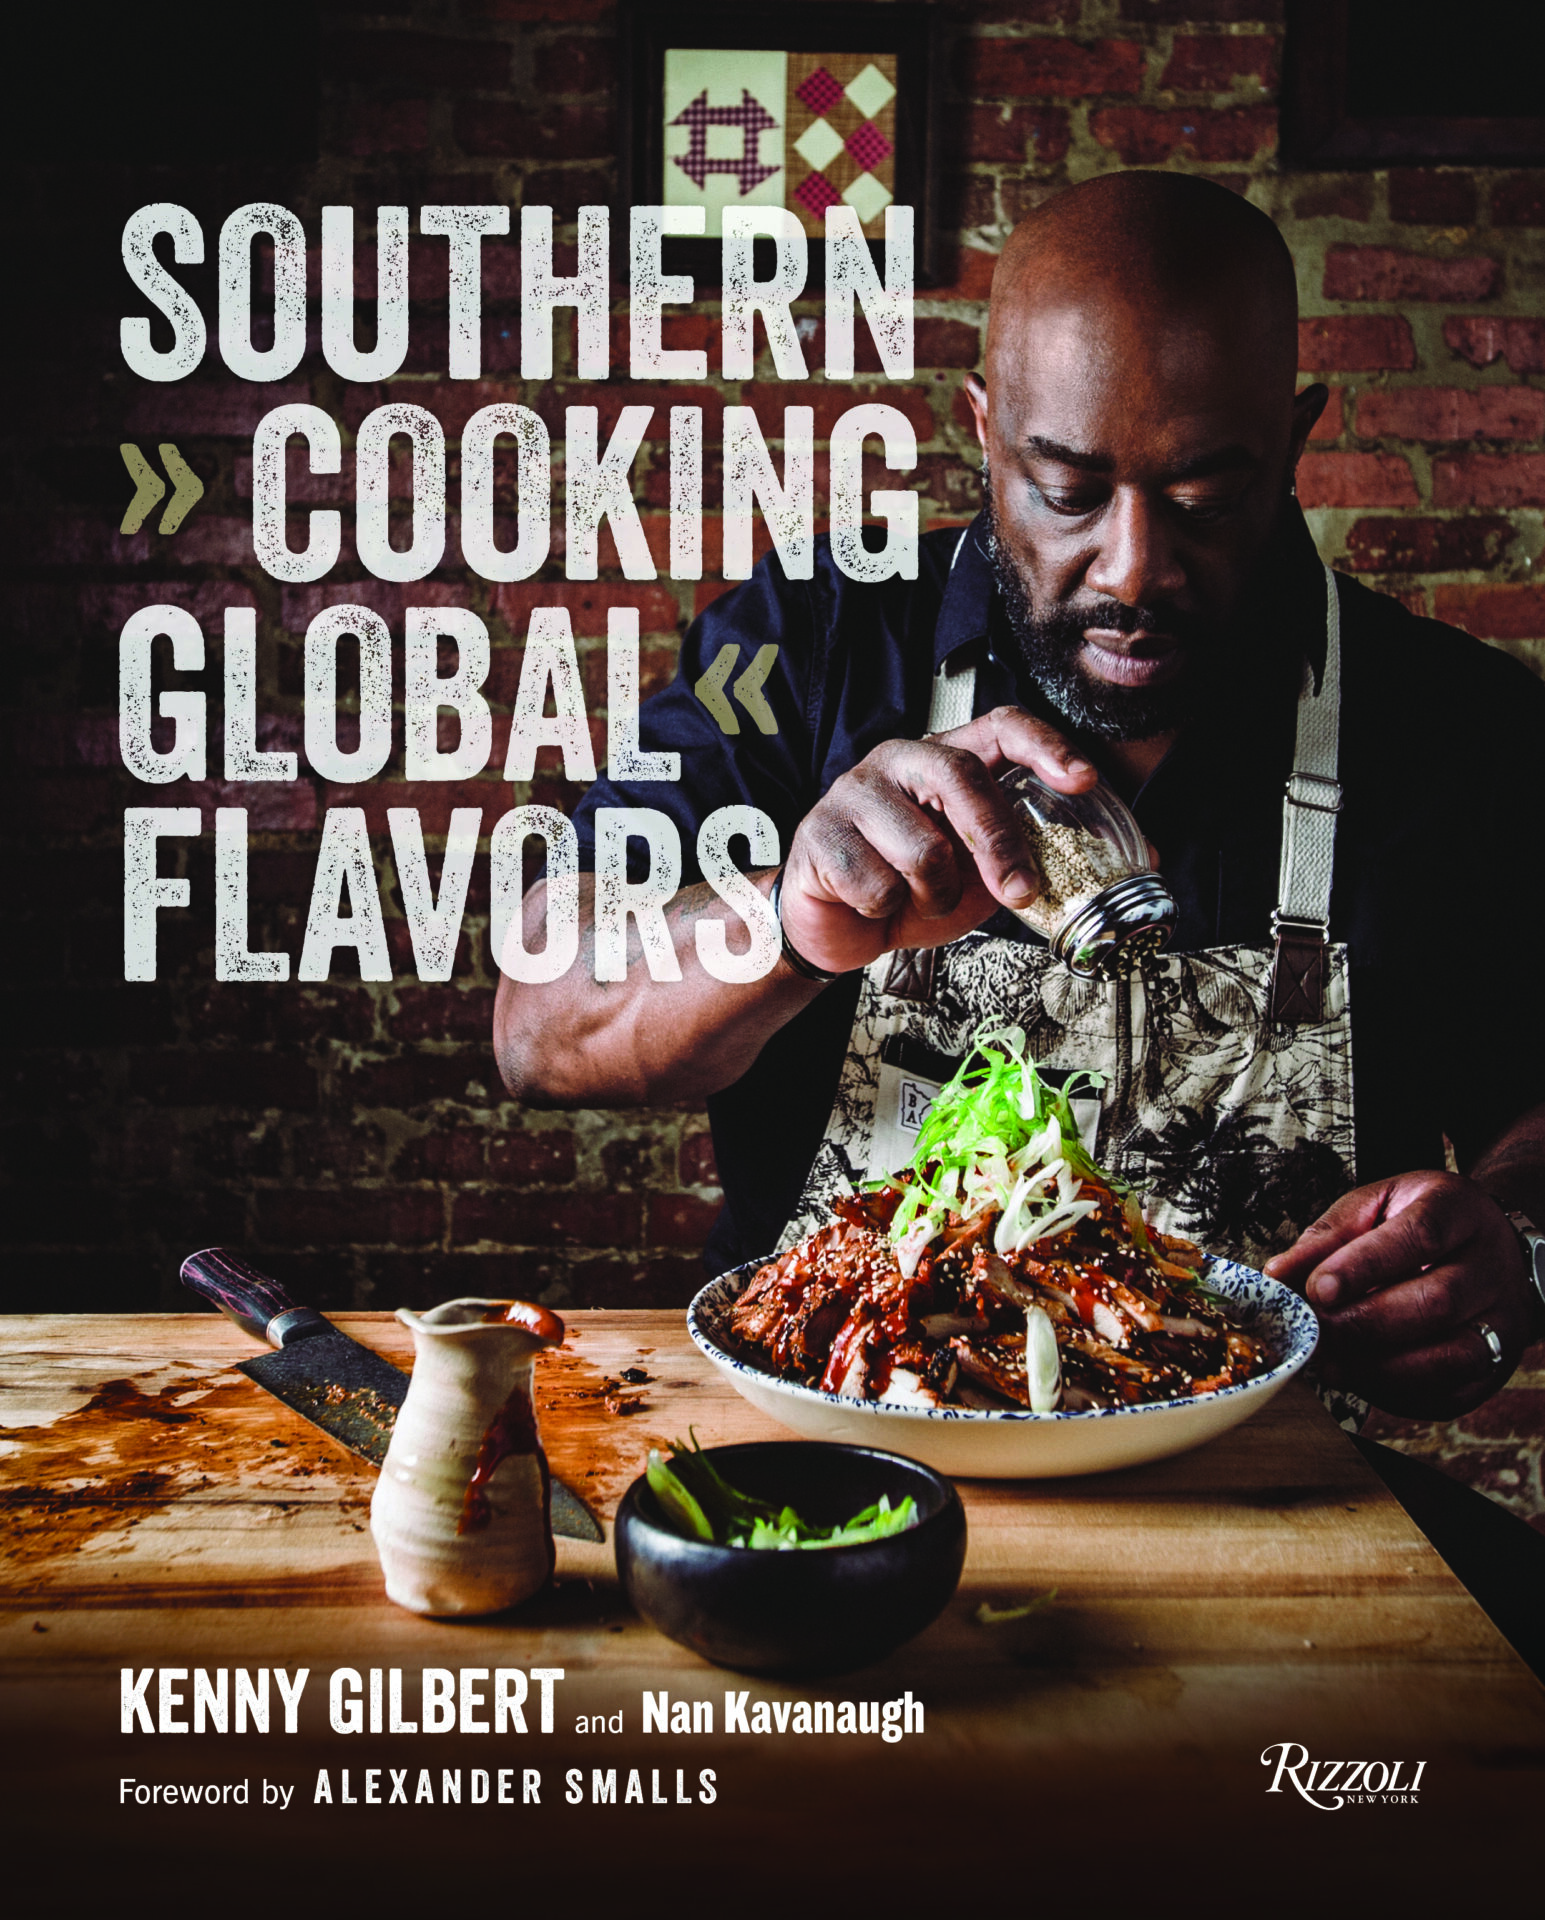 The cover of a southern cooking book.